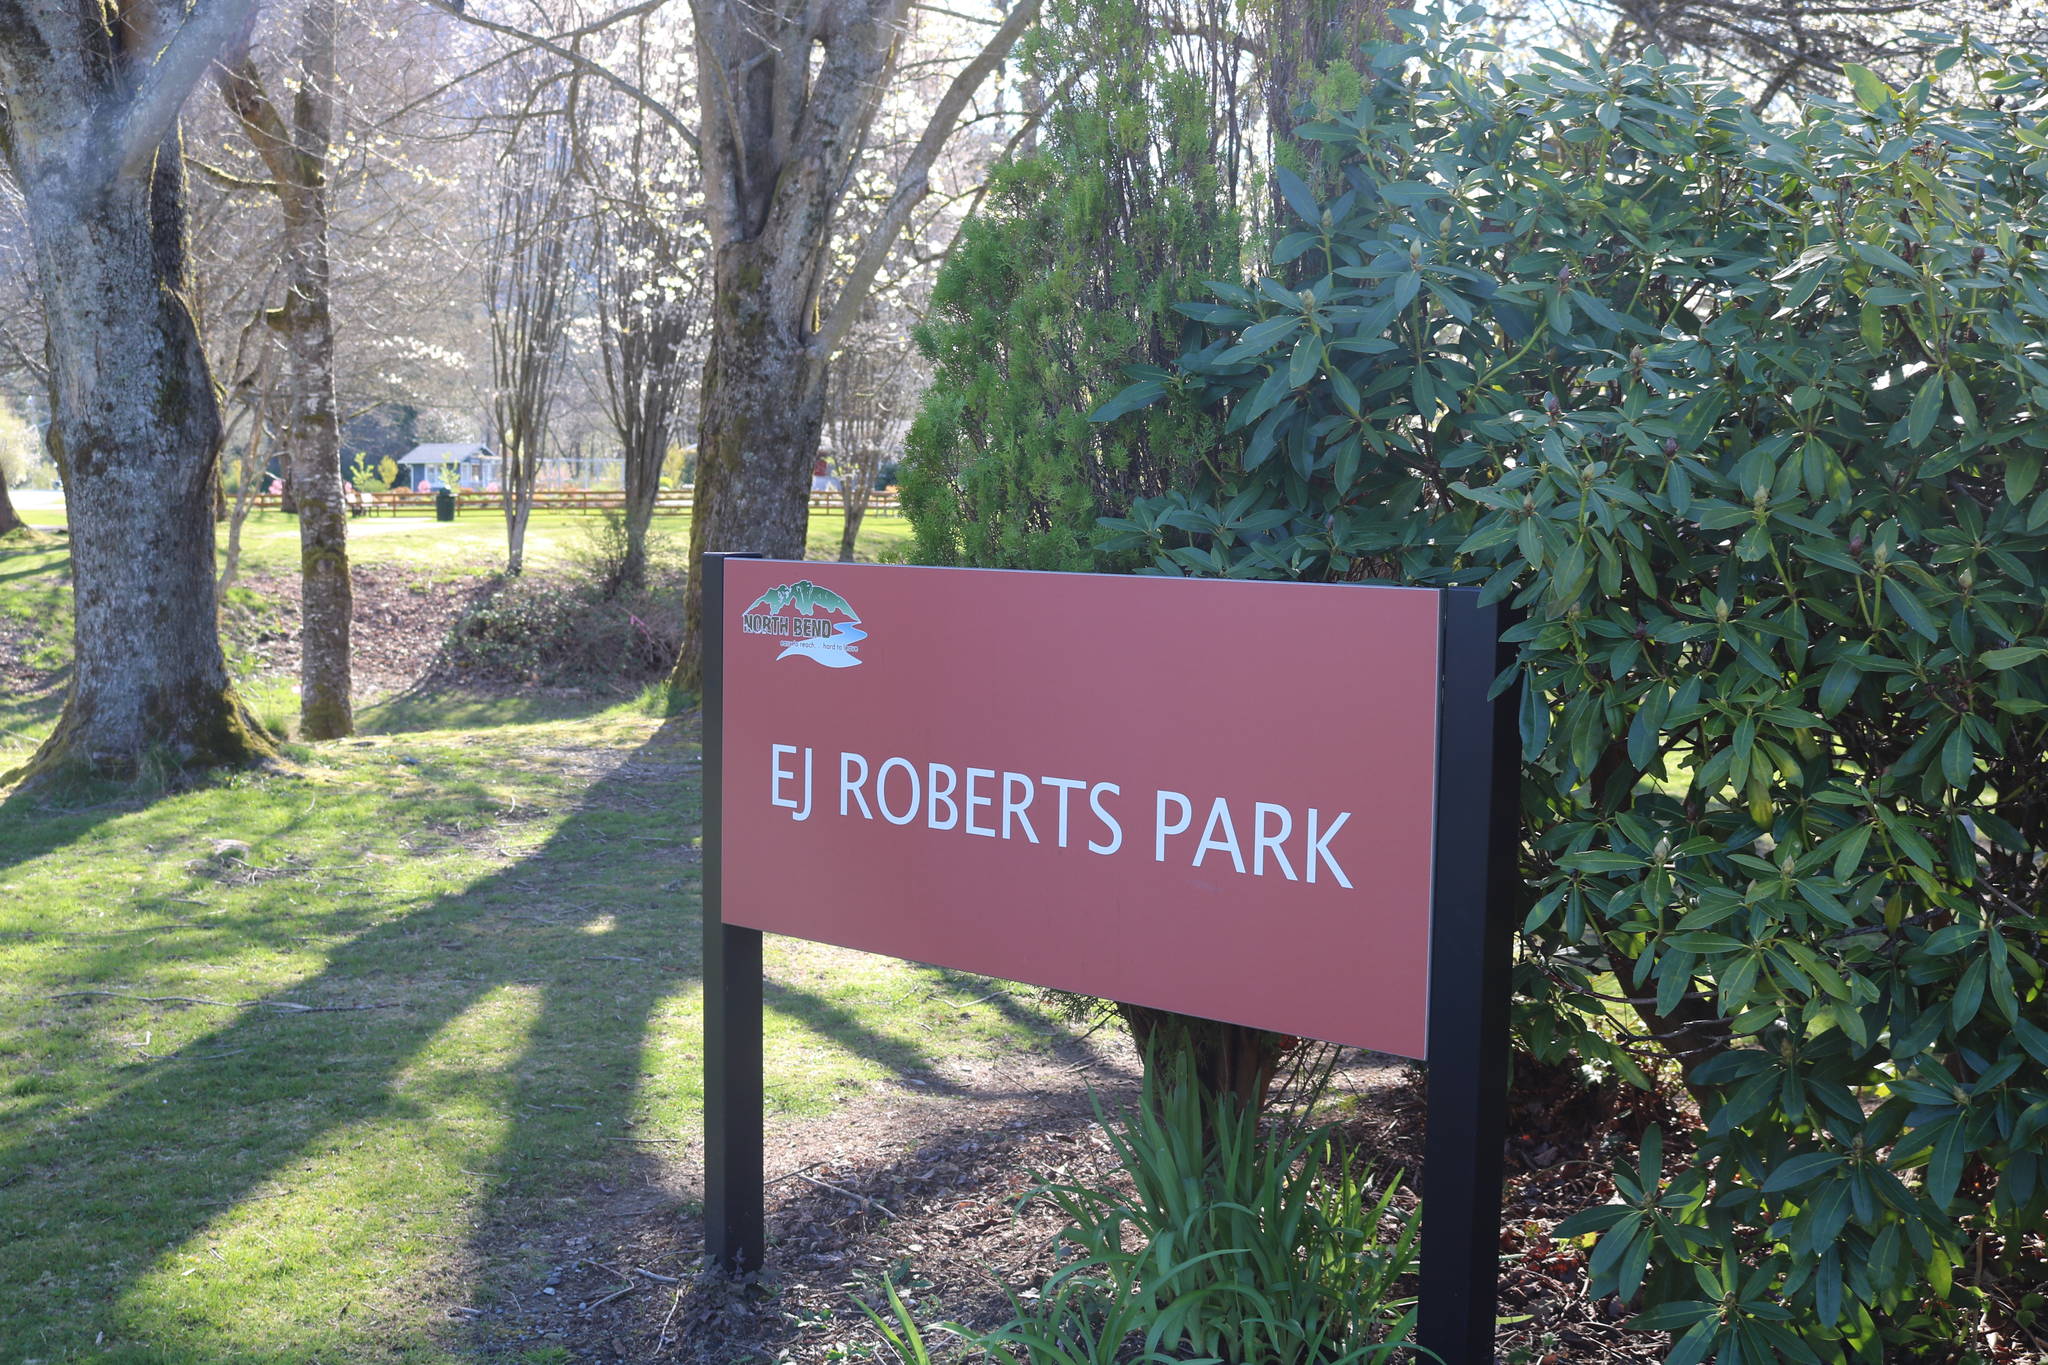 Aaron Kunkler/staff photo
EJ Roberts Park was named after a local real estate developer who in the 1940s included covenants in the Silver Creek neighborhood that barred people of color from living there.